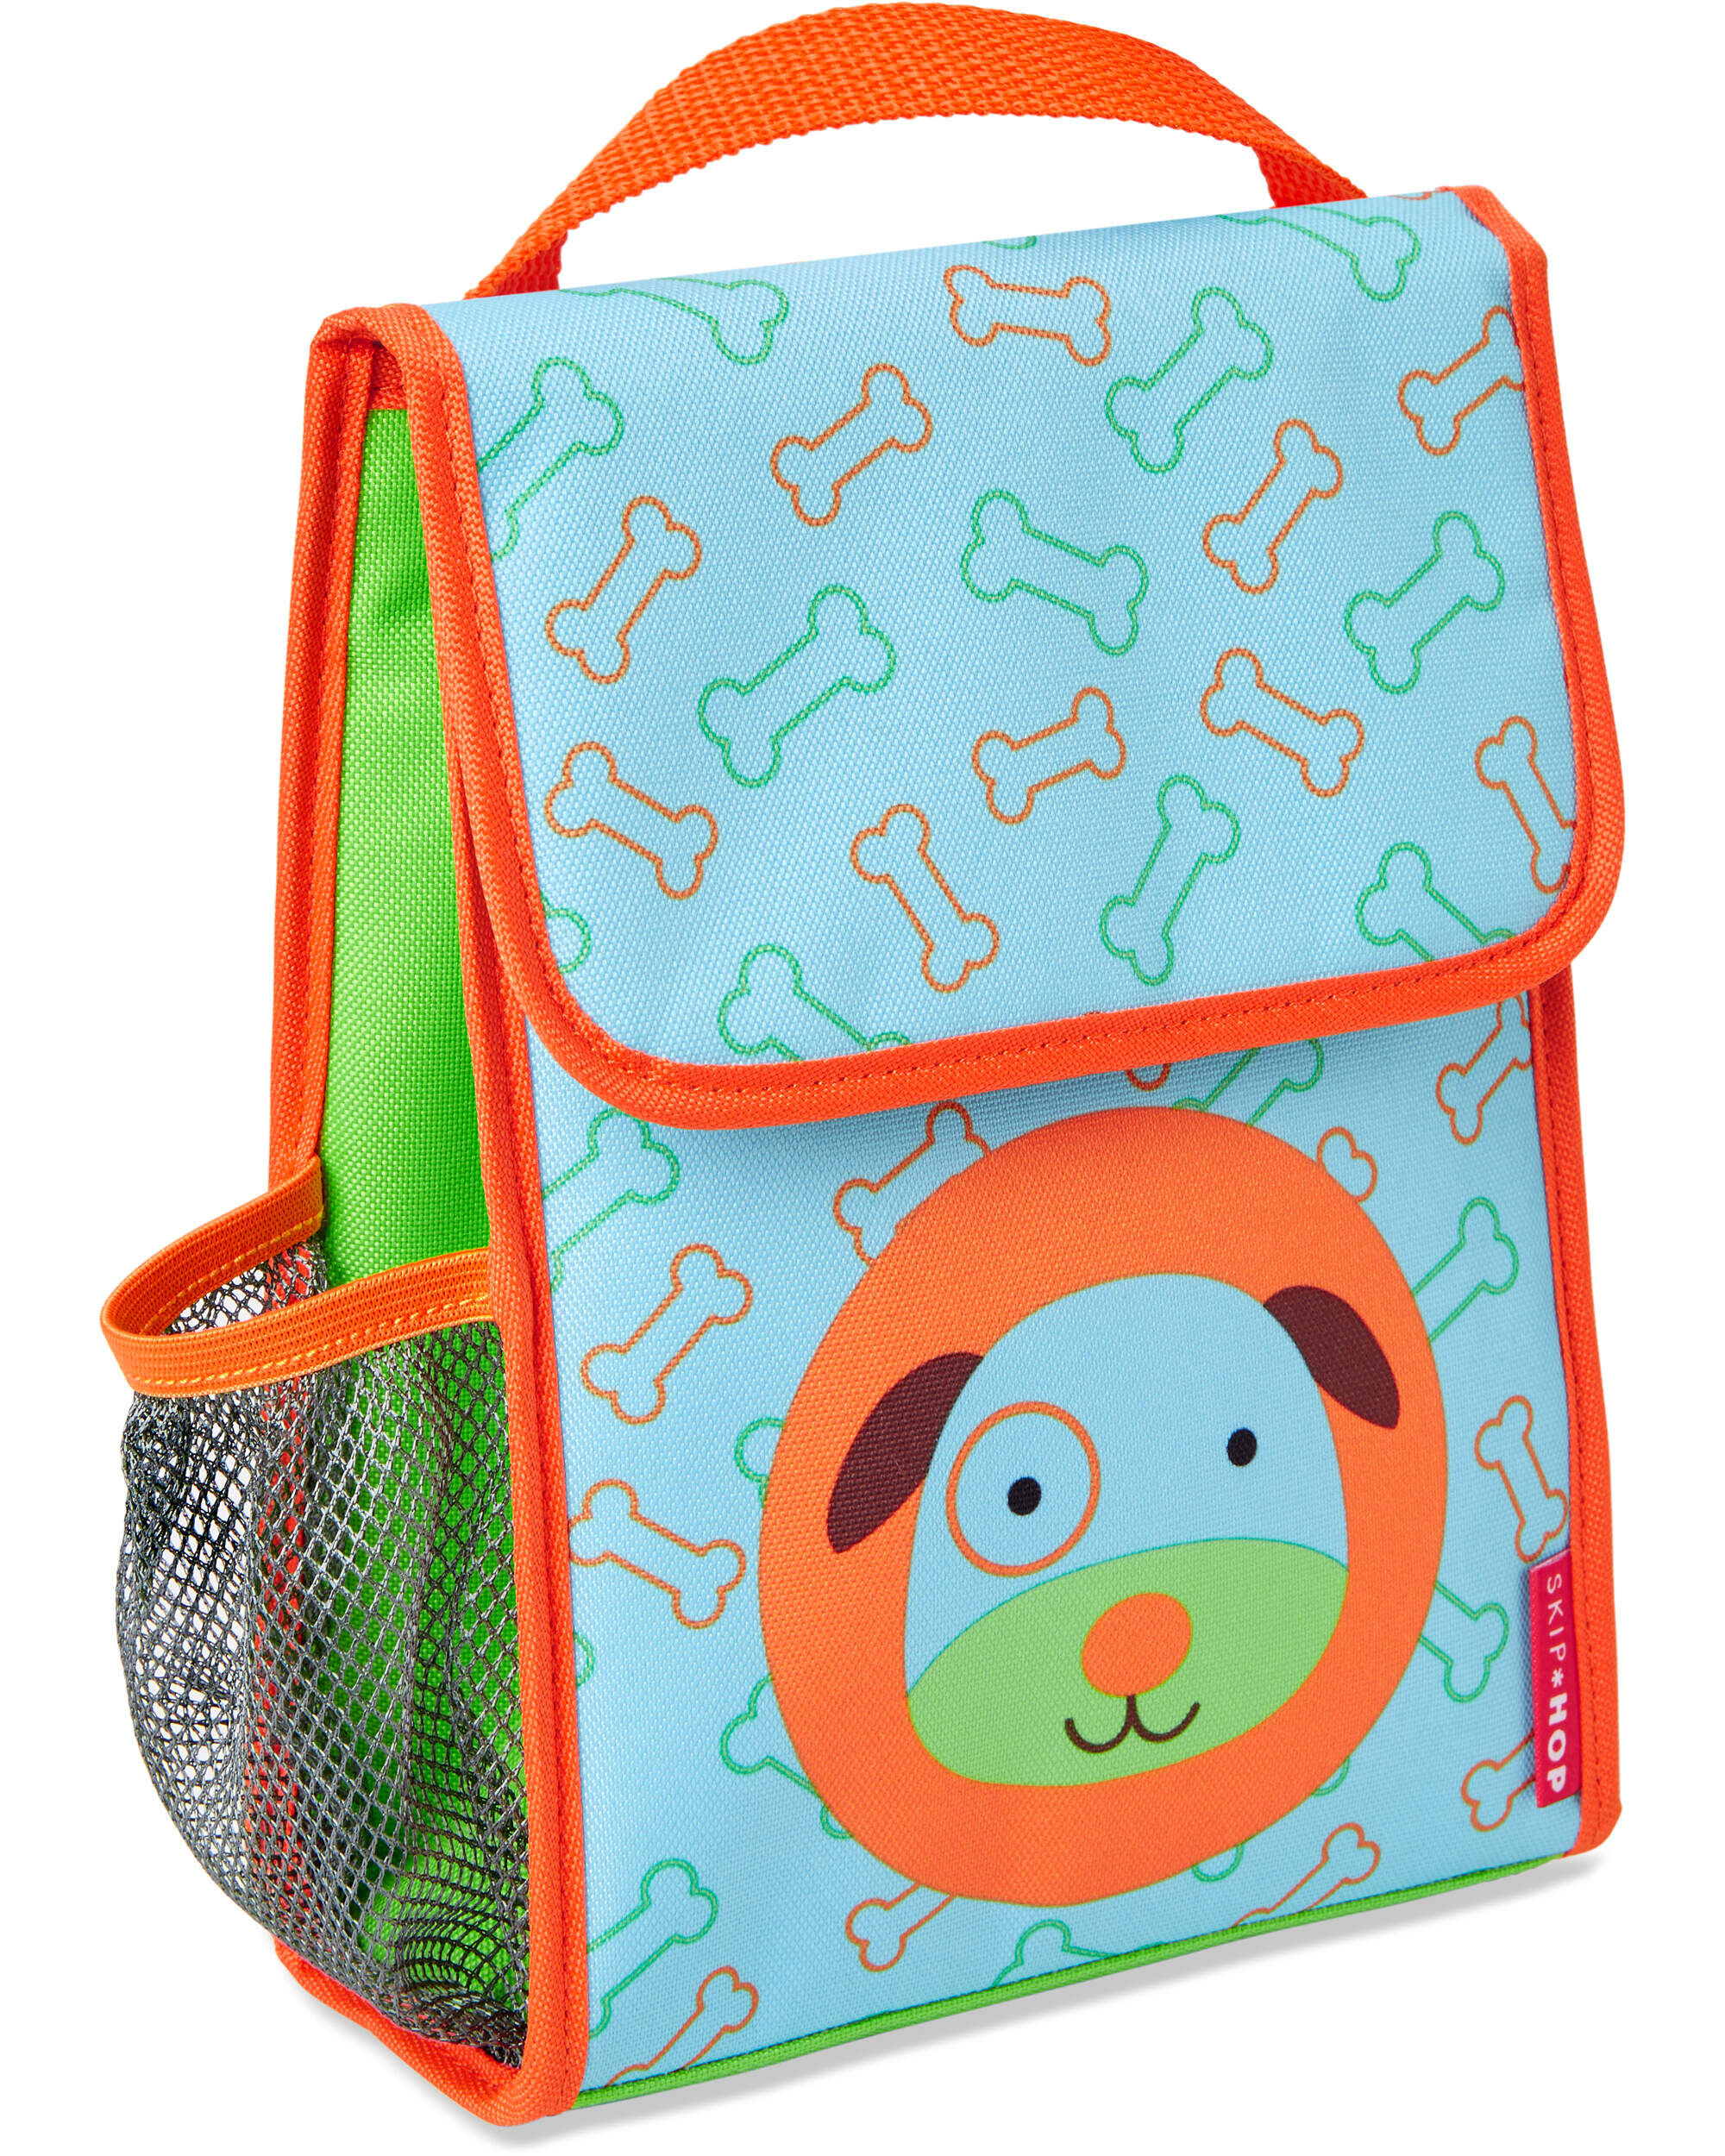 Blue Darby Dog Skip Hop Zoo Kids Insulated Lunch Box 